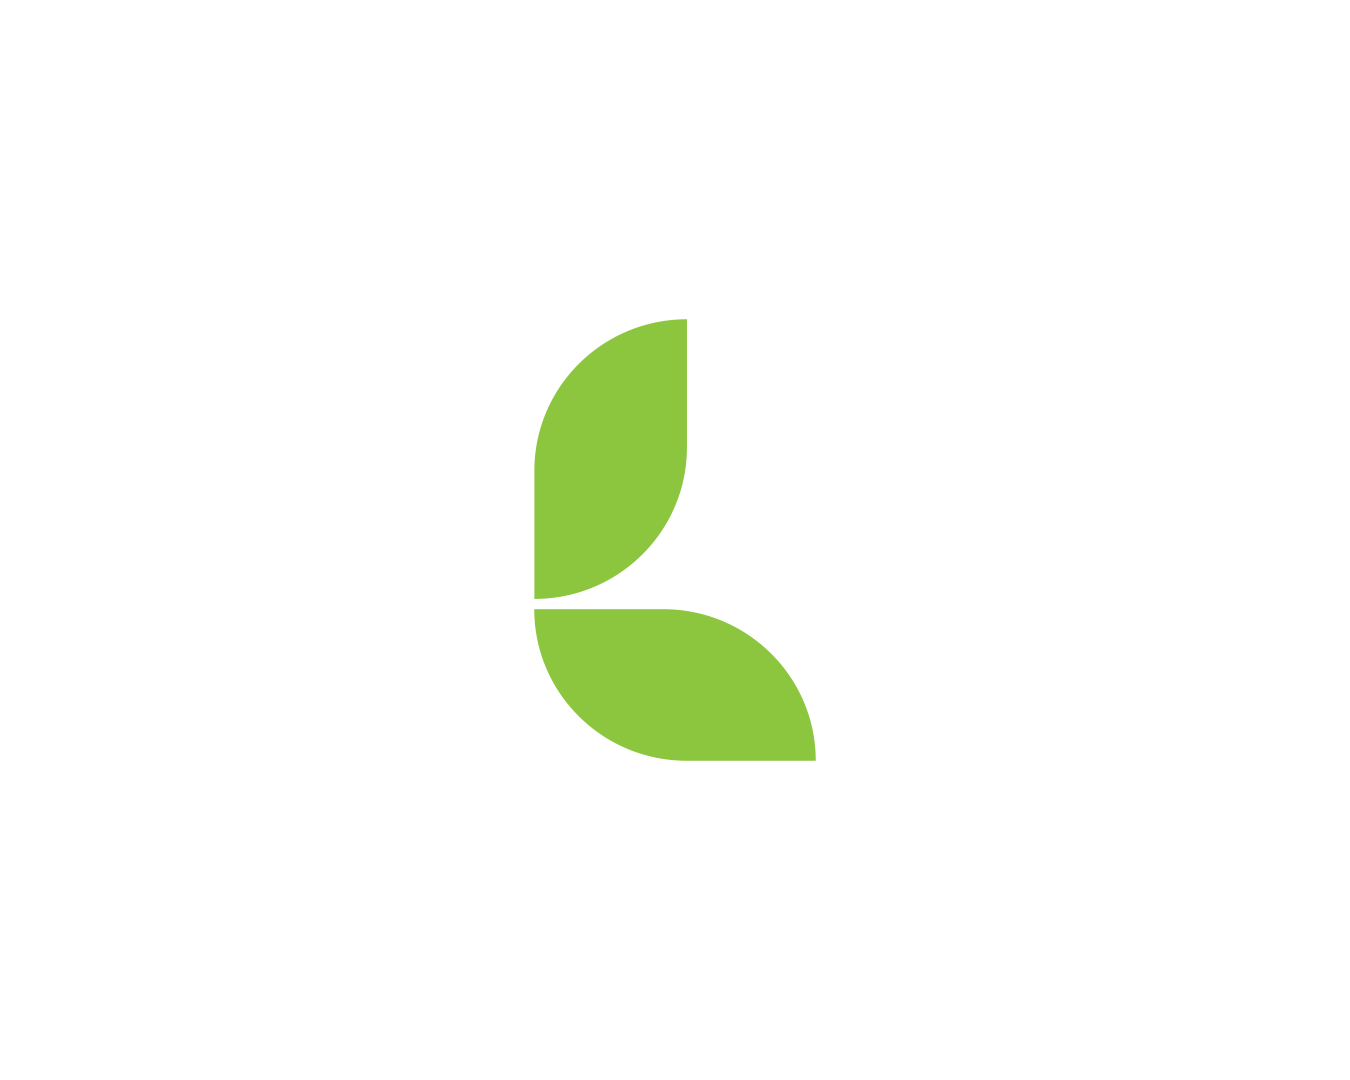 Process behind the leaf icon.